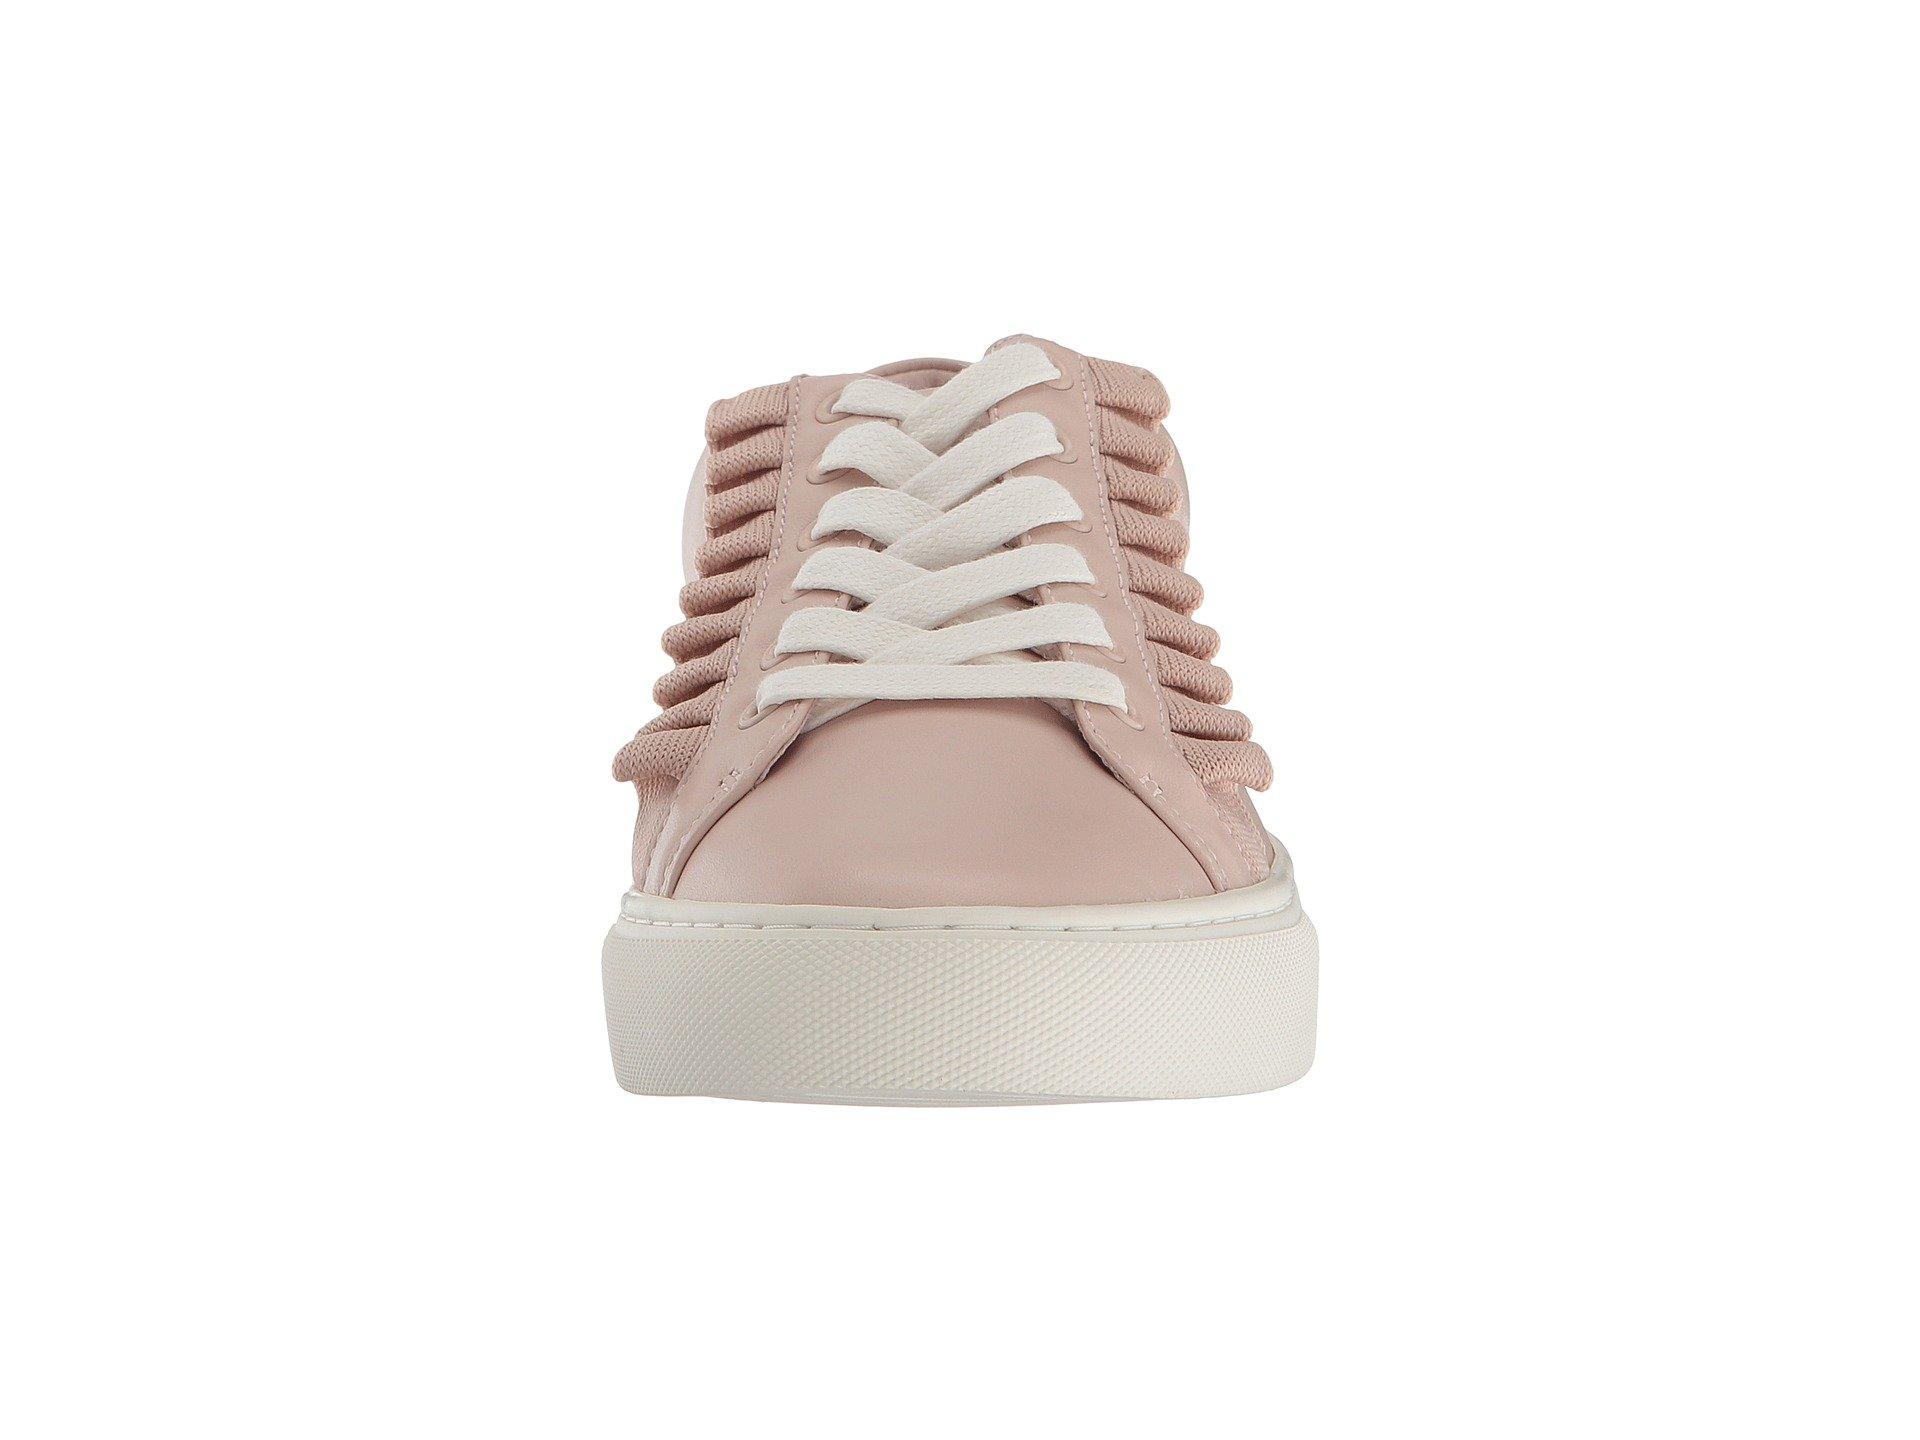 Tory Sport Ruffle Leather Sneakers in Pink Shell (Pink) - Lyst